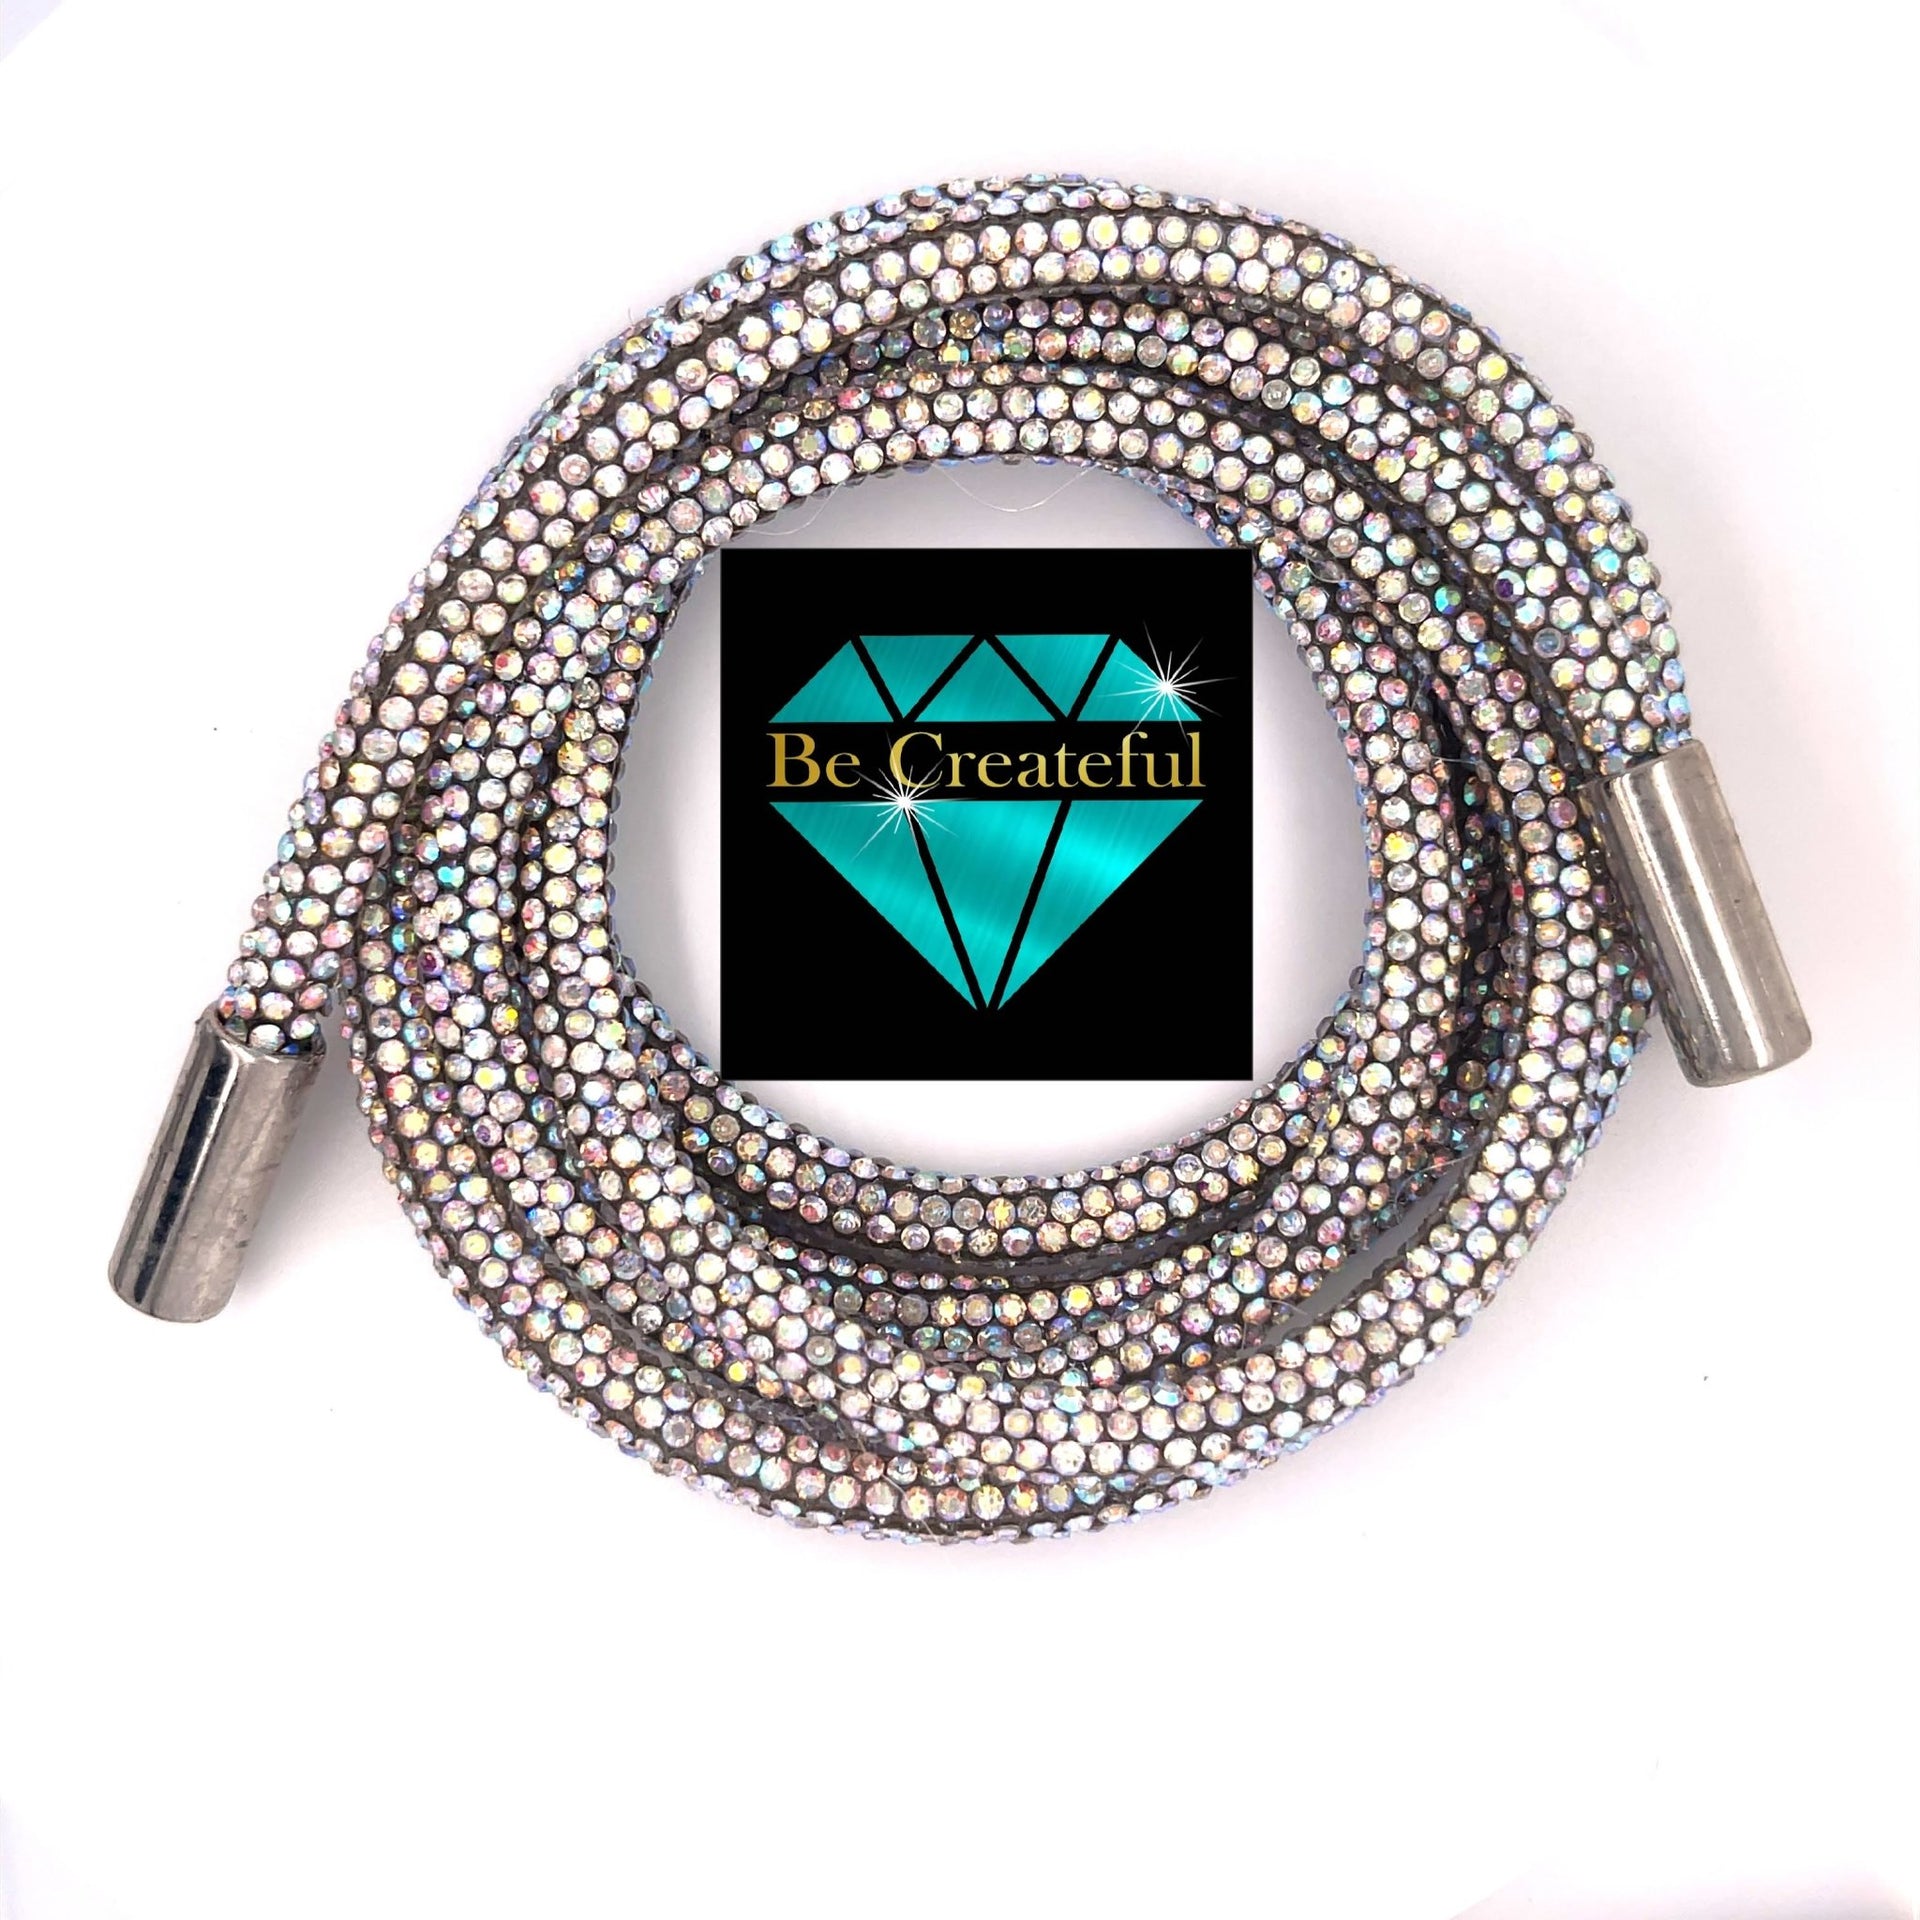 We have added these fun new crystal rhinestone hoodie string ropes